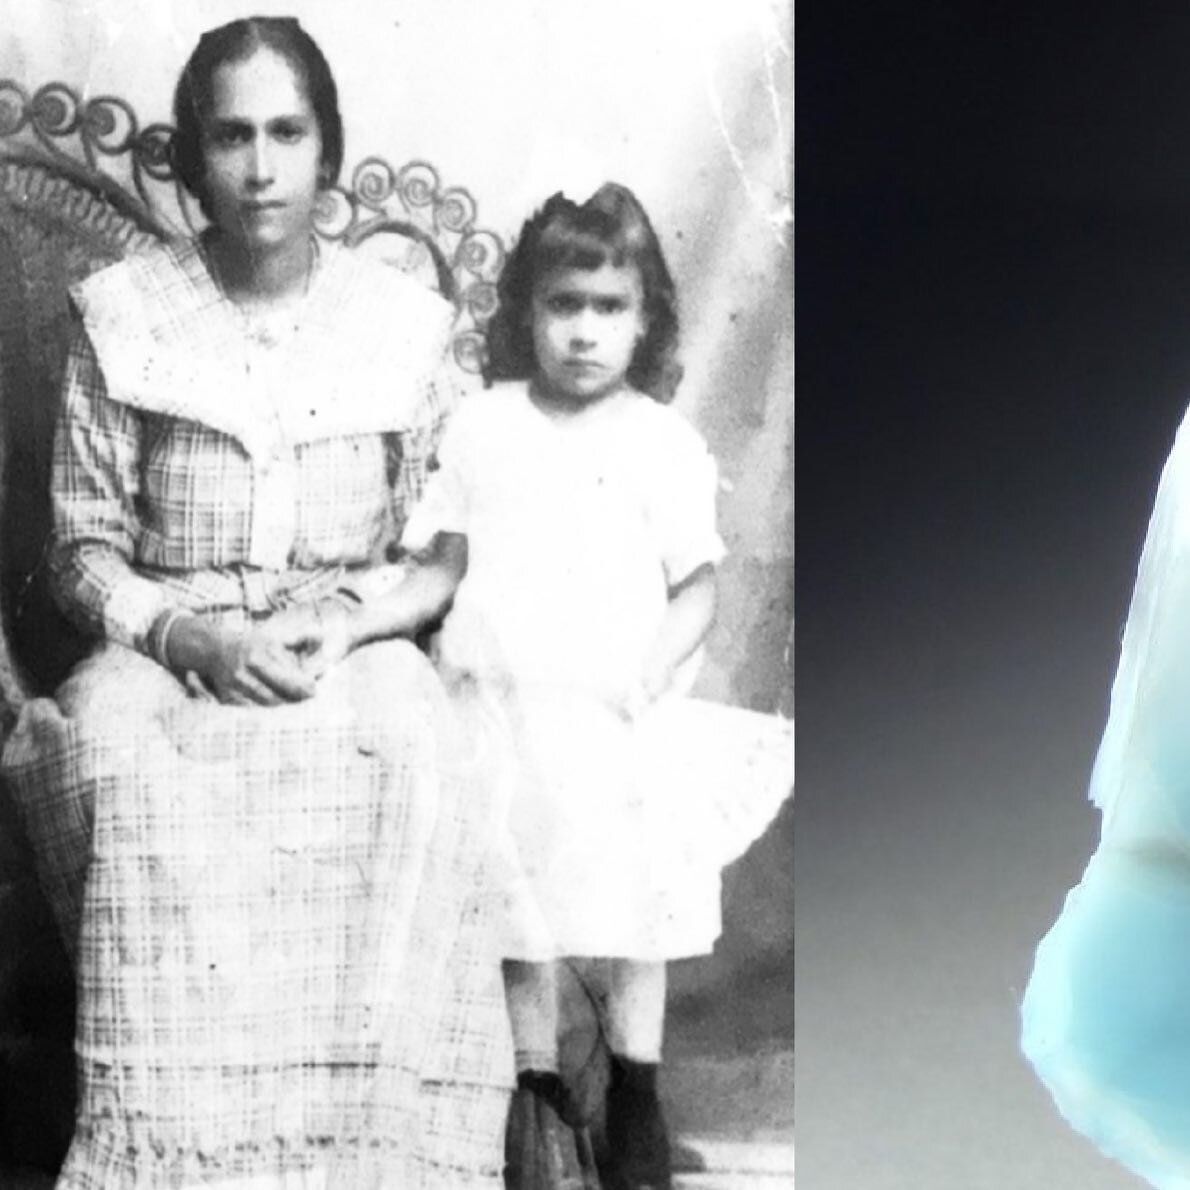 Pictured: My maternal great-grandmother and my grandmother. Whispering prayers was something I observed my great-grandmother do morning, noon and night. She was the inspiration behind my book WHISPERED PRAYERS. Make sure to pre-order your copy (link 